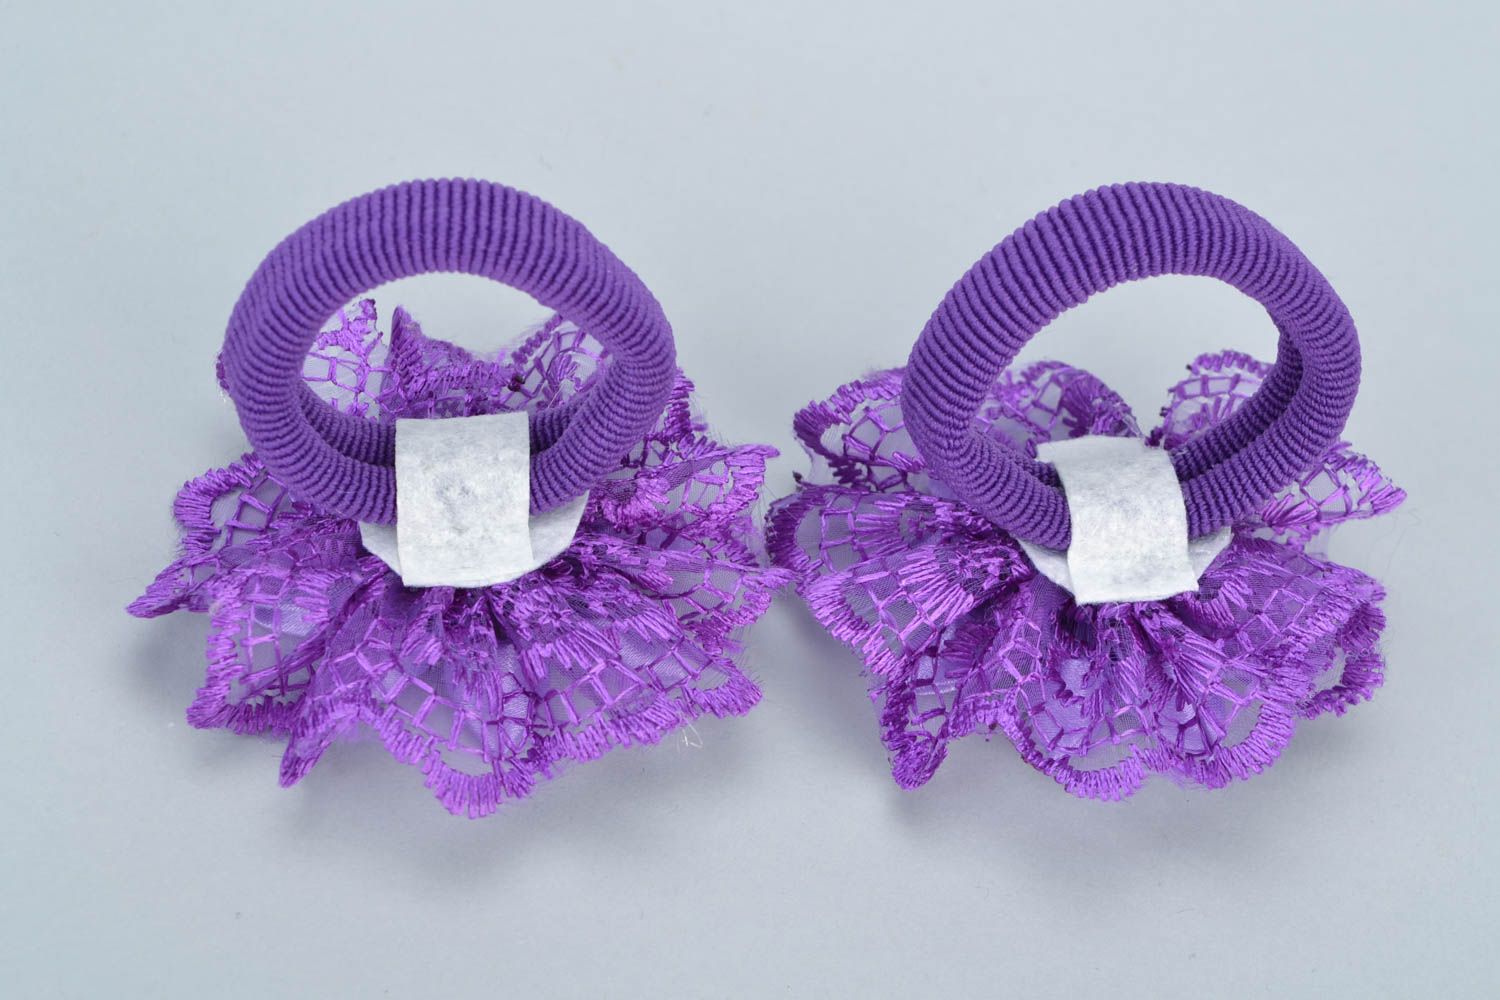 Handmade purple scrunchies with flowers made of satin ribbons kanzashi technique 2 pieces photo 4